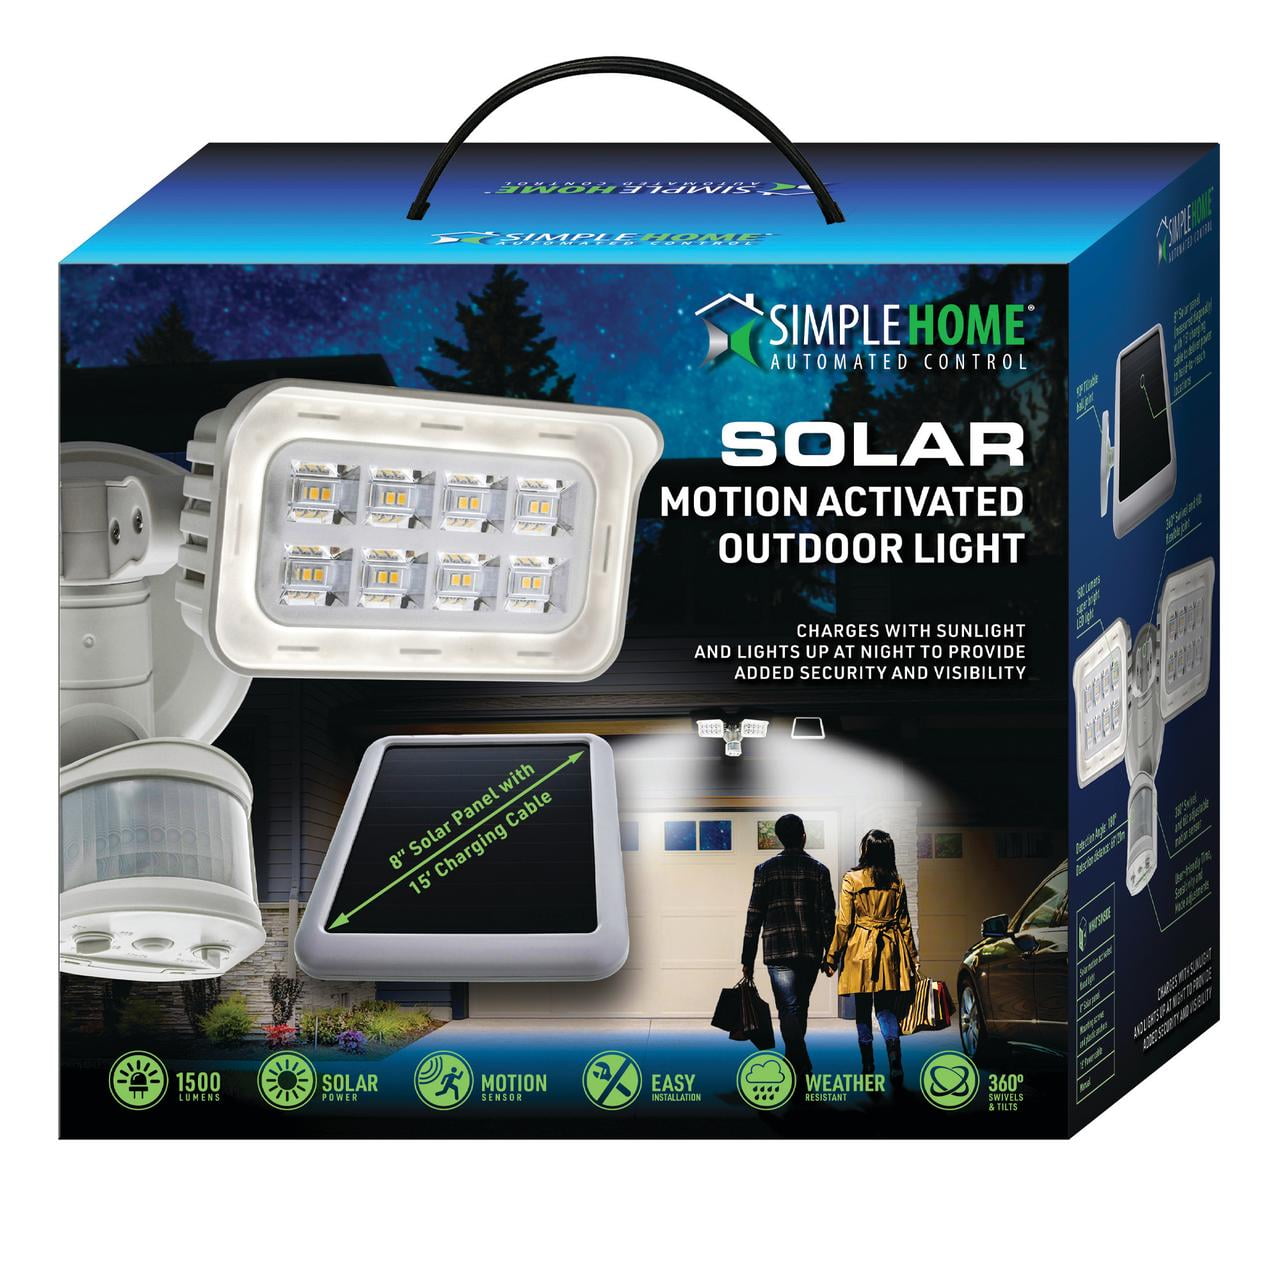 Simple Home 360 degree Solar Motion-Activated Outdoor 1500 Lumens Walmart.com